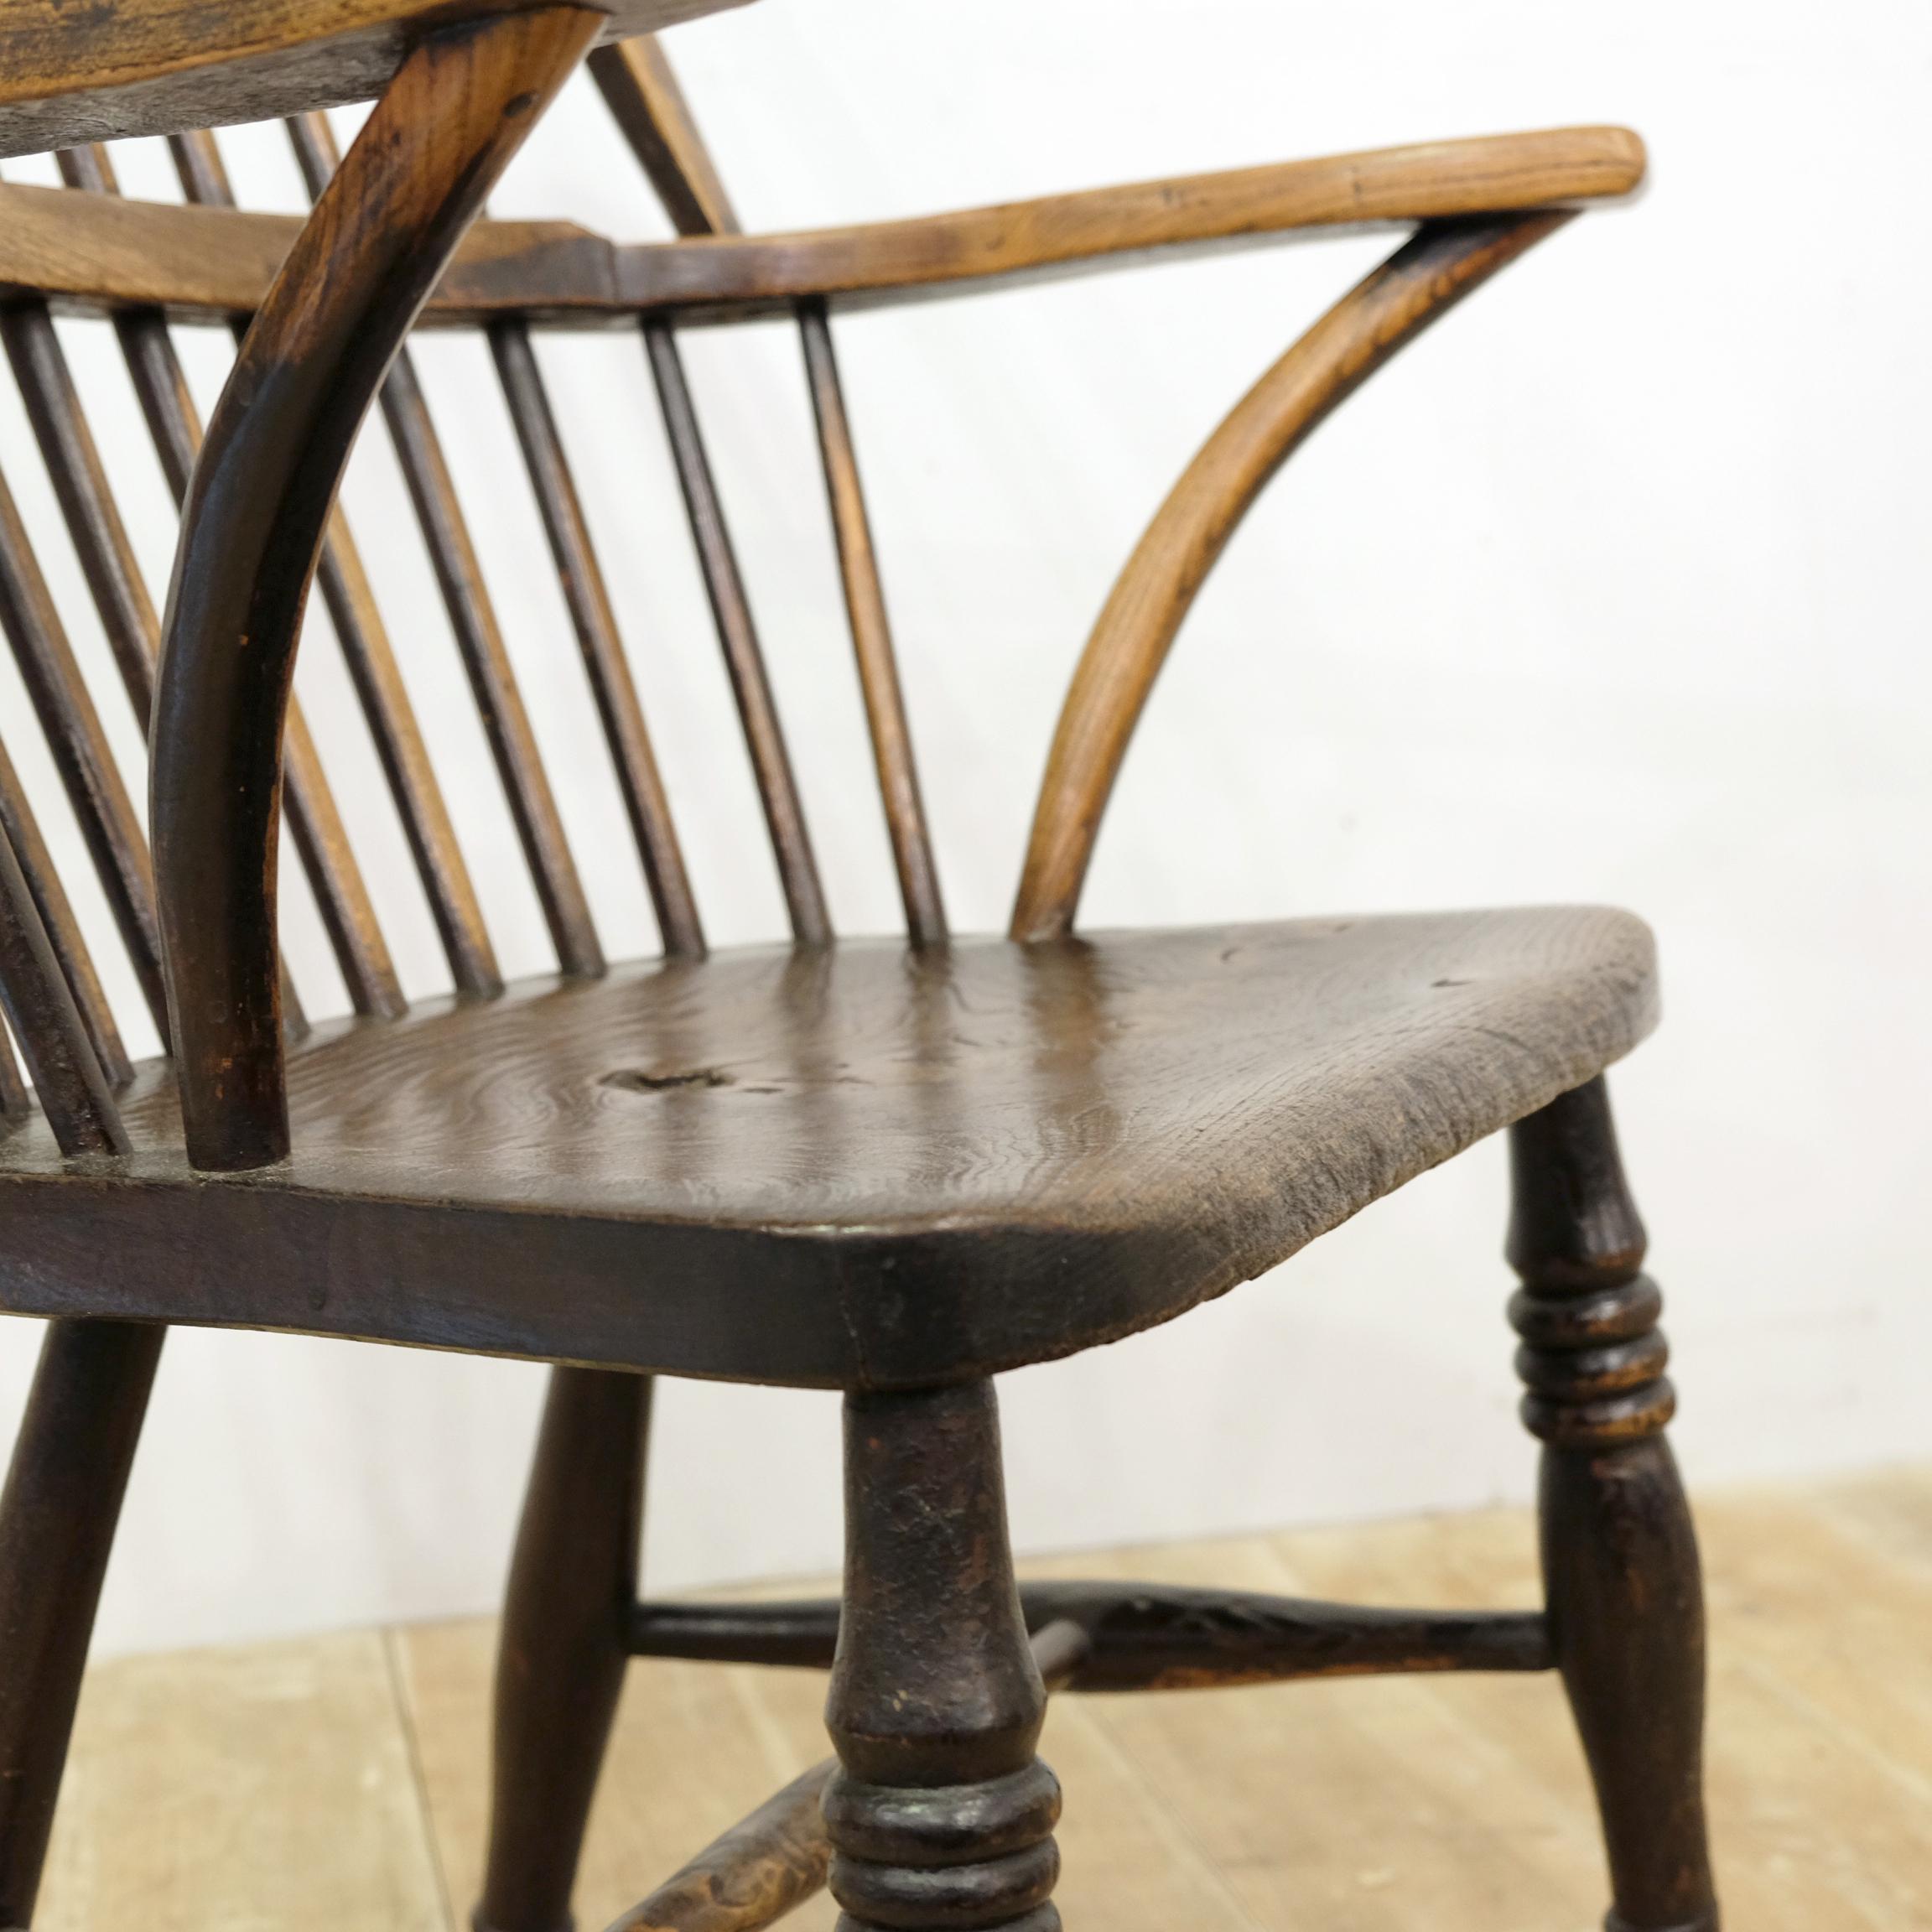 An attractive and characterful three-part arm Windsor chair in elm, birch and ash. Dating from circa 1830, it is likely from the Culm Valley area of mid Devon. Although unstamped, it bears uncanny resemblances to the chairs made by Frost and